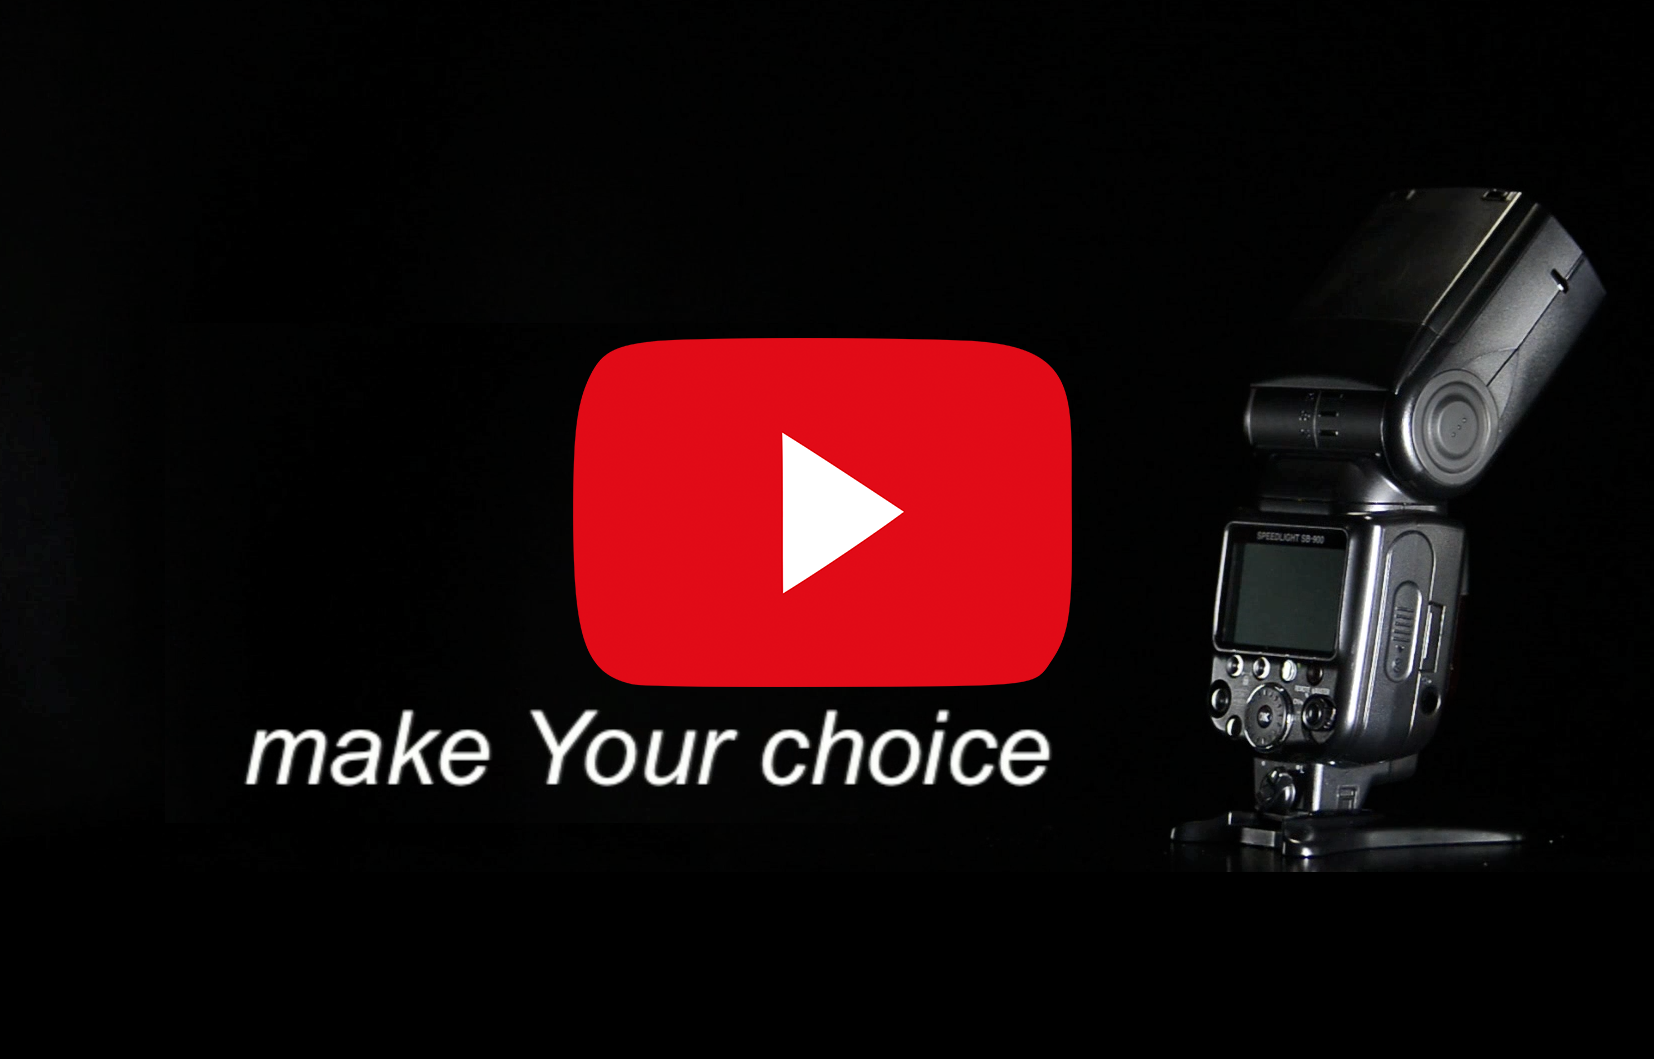 Nikon SB900 ADVERTISING VIDEO (Commercial Video Production Service)